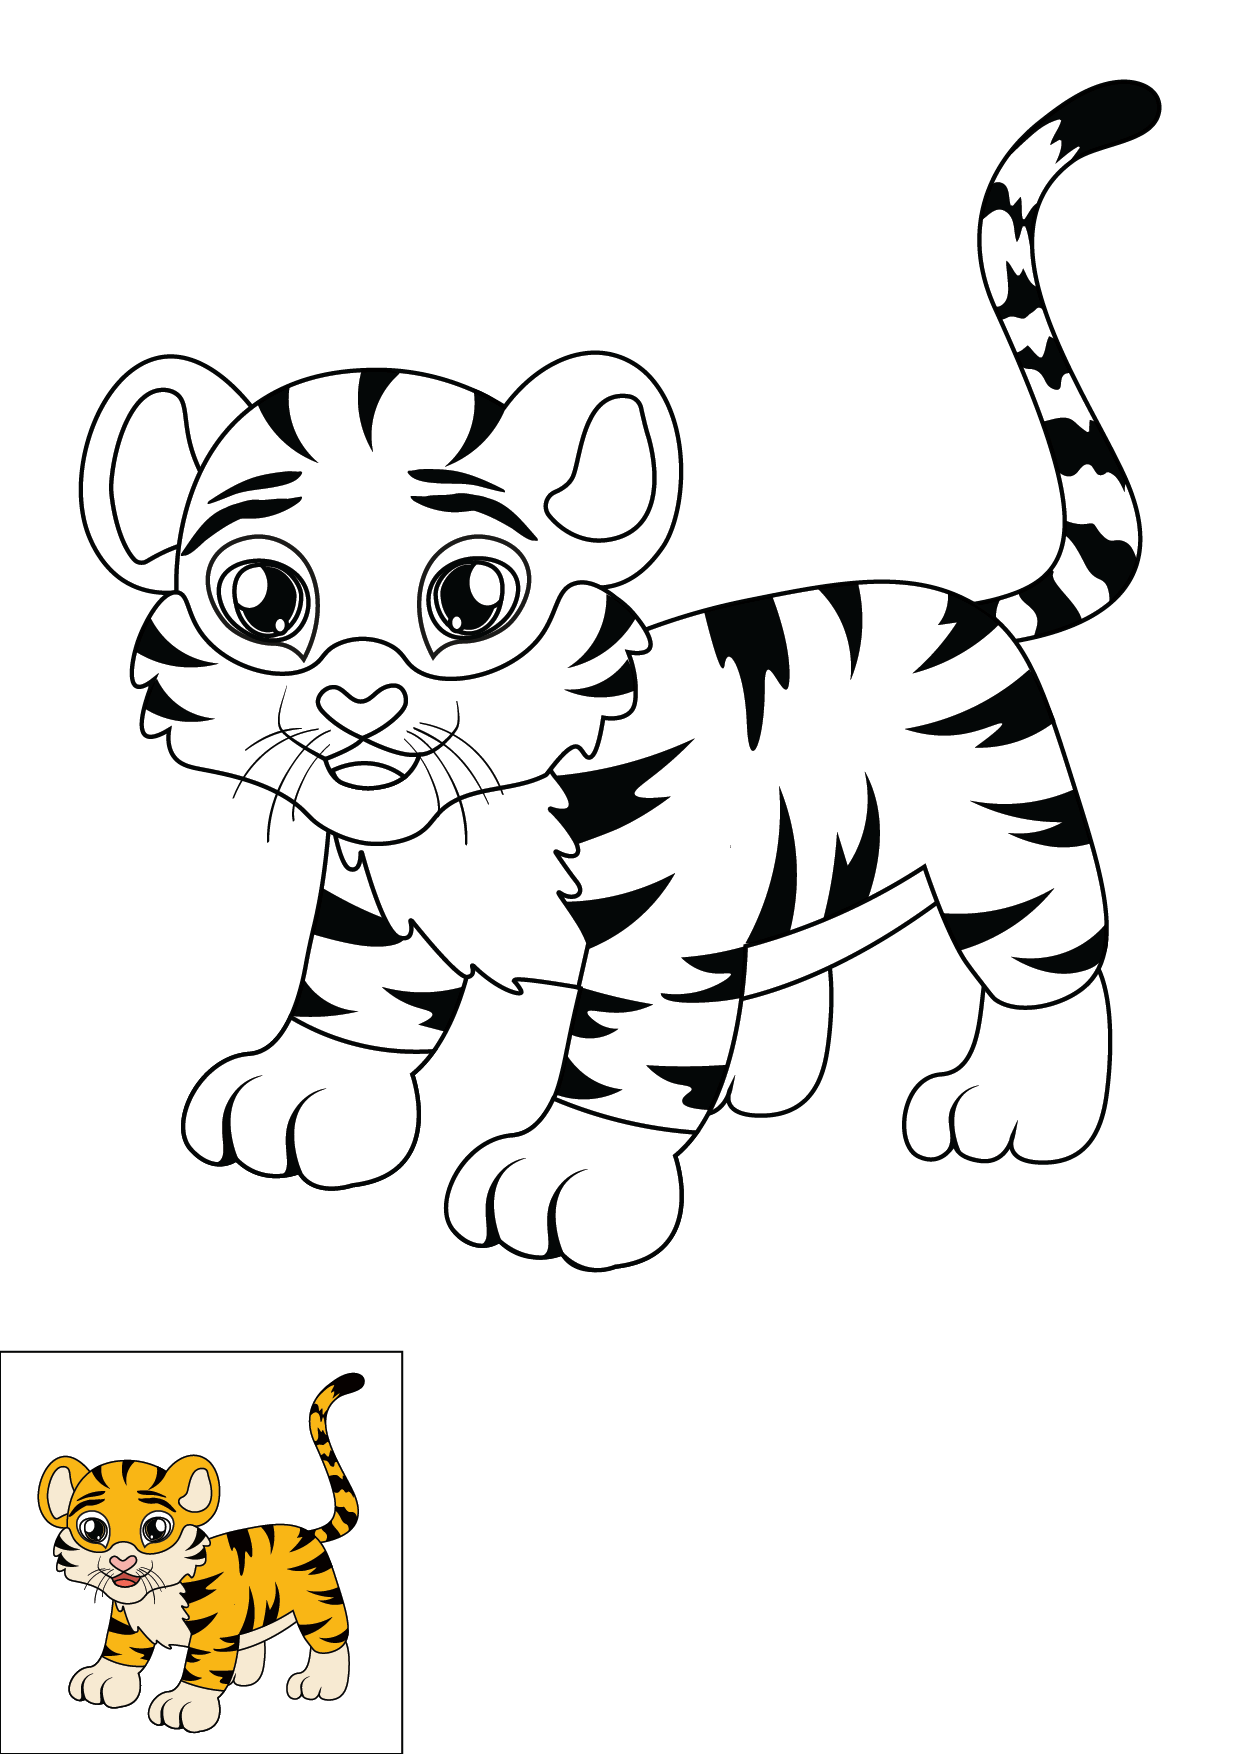 How to Draw A Tiger Step by Step Printable Color